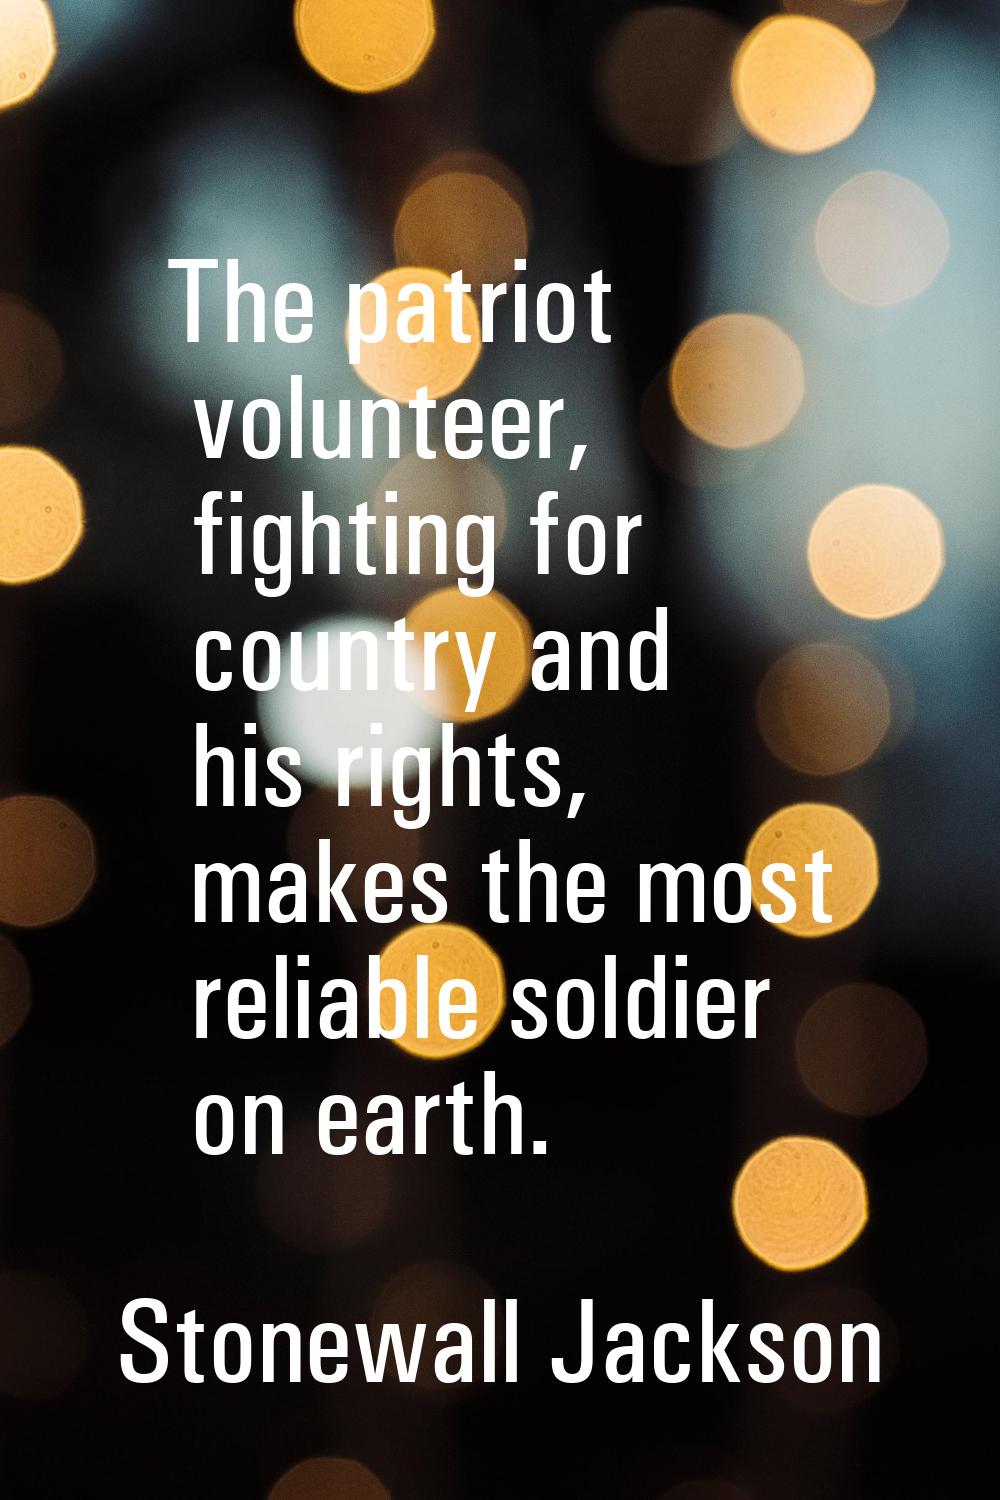 The patriot volunteer, fighting for country and his rights, makes the most reliable soldier on eart